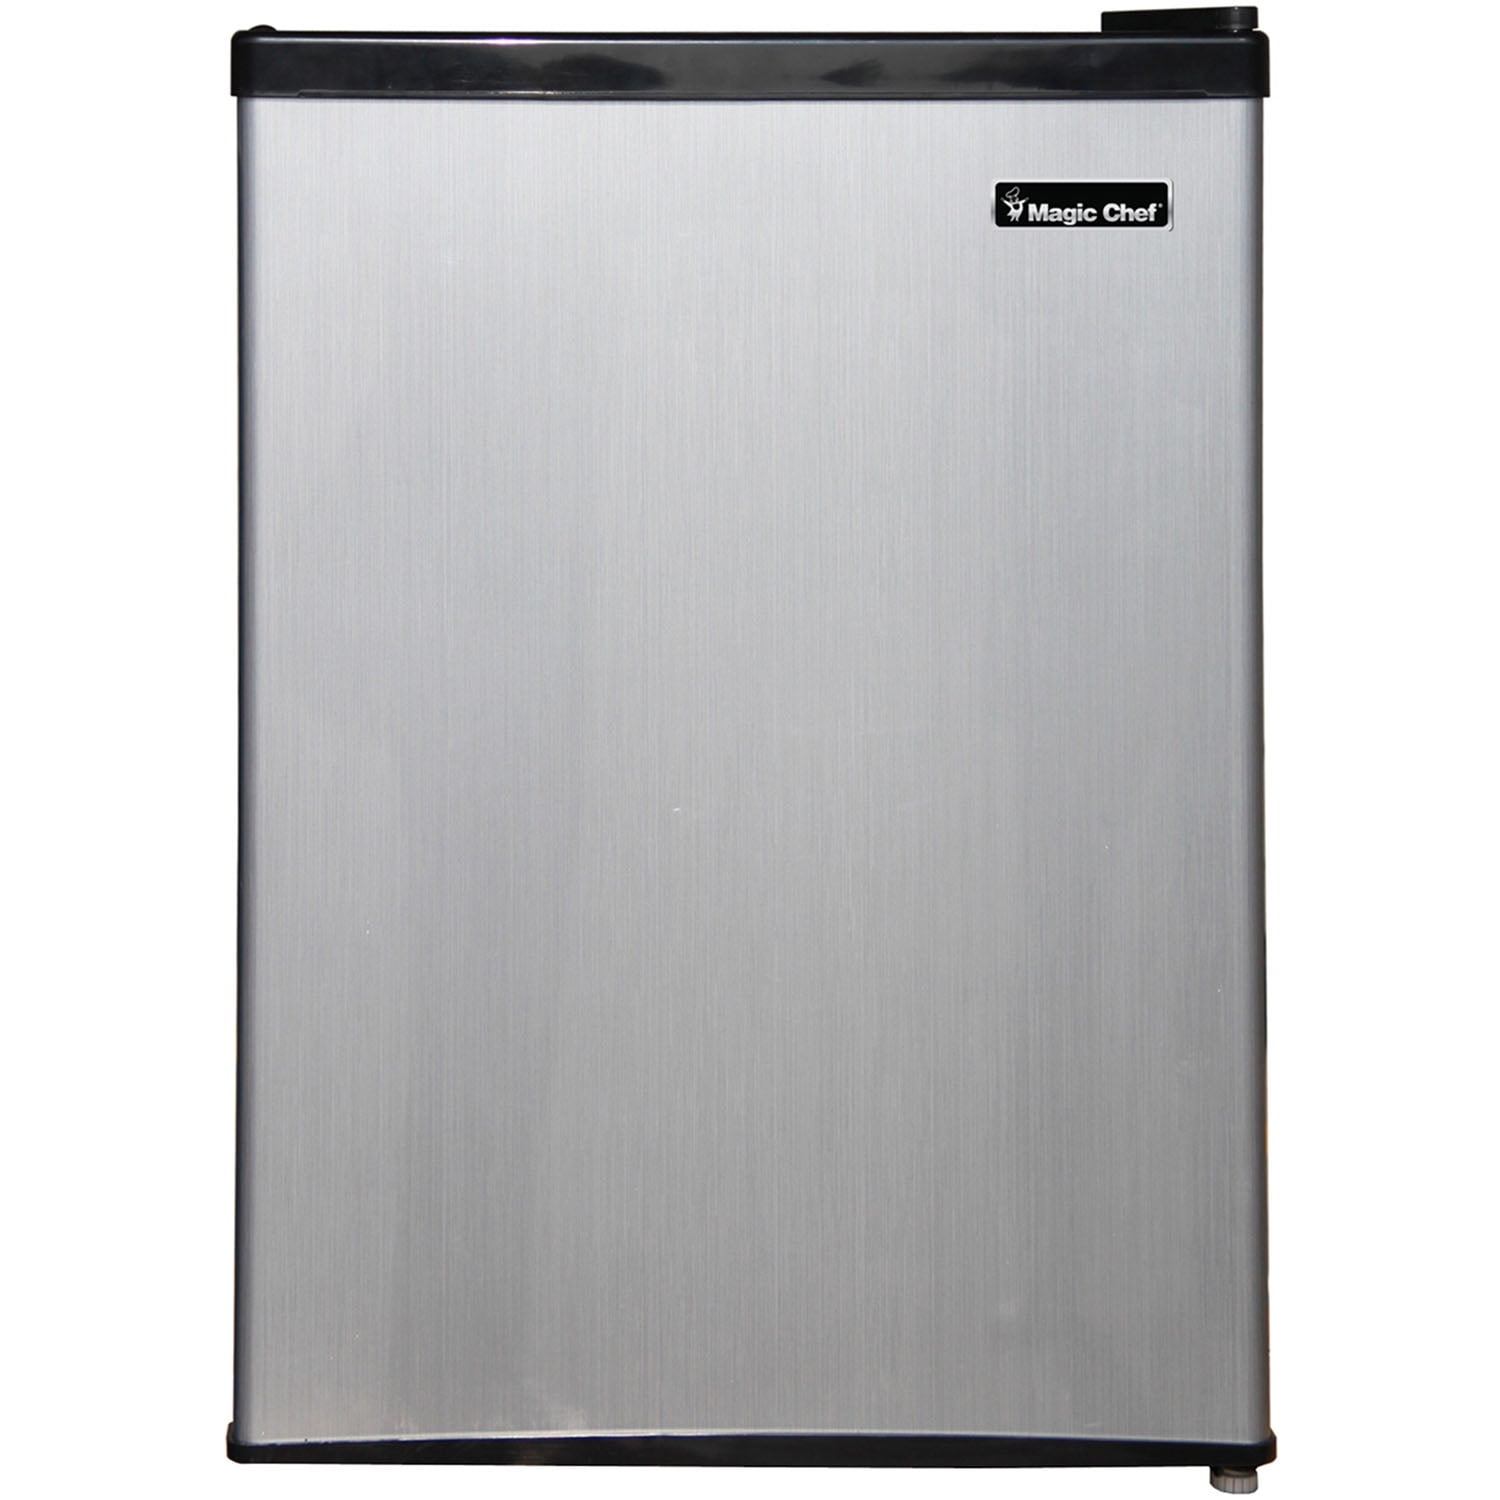 Details about   Magic Chef MCBR240S1 2.4 cu.ft.Compact Refrigerator Freezer Stainless Look 